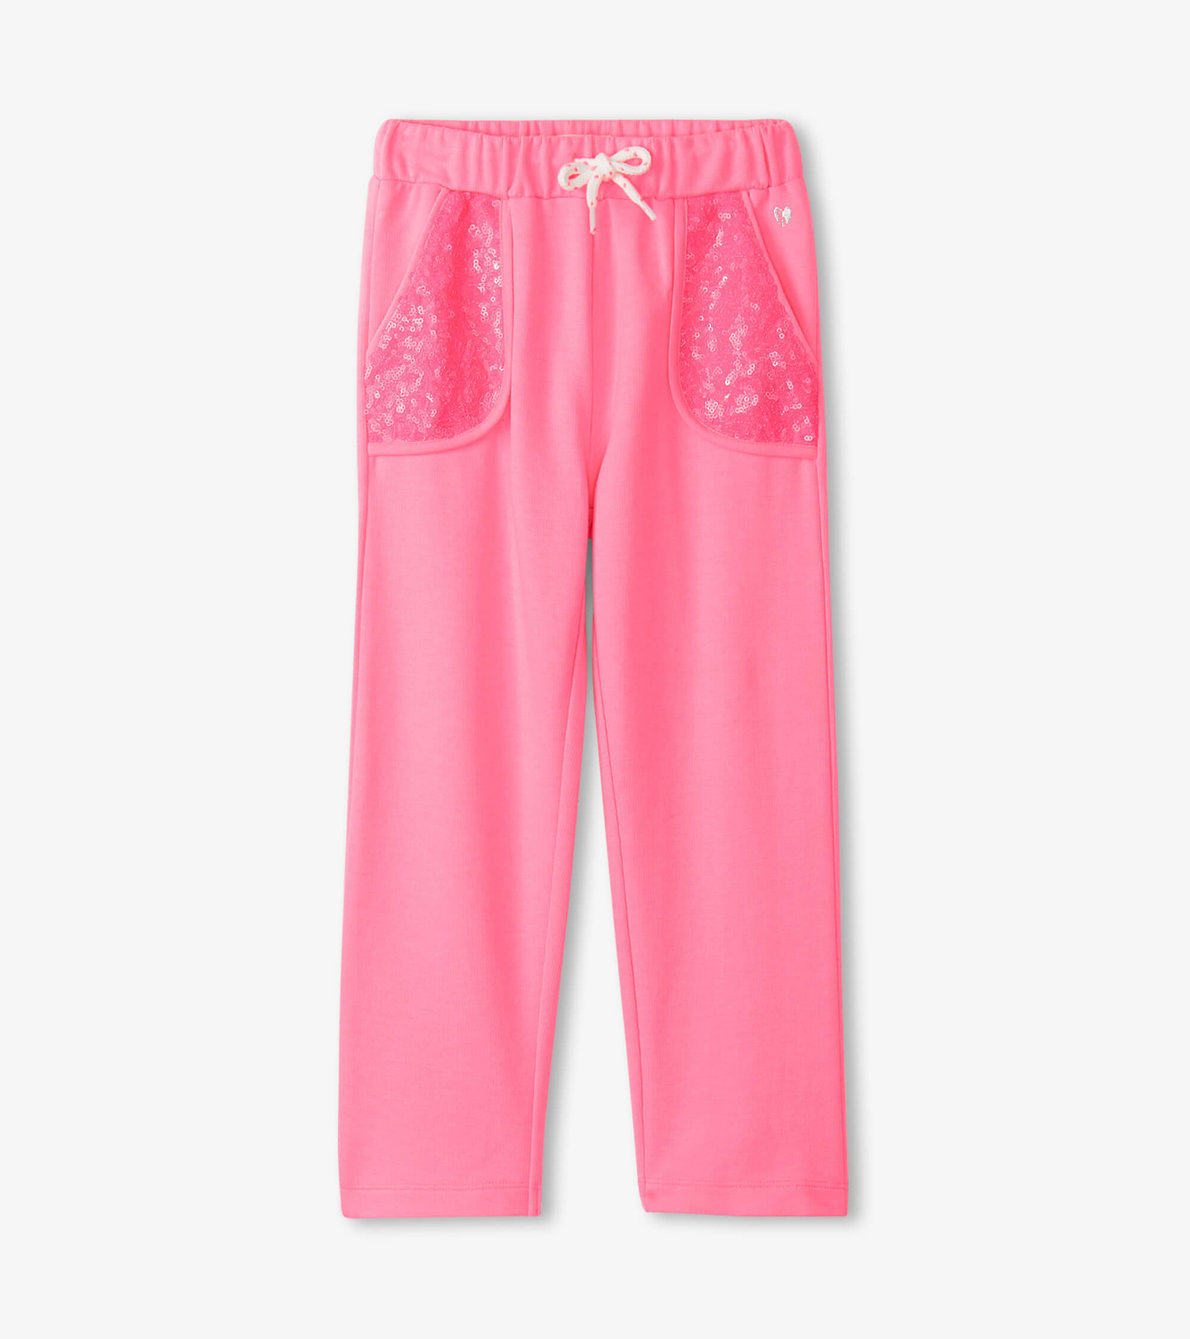 View larger image of Girls Pink Neon Track Pants